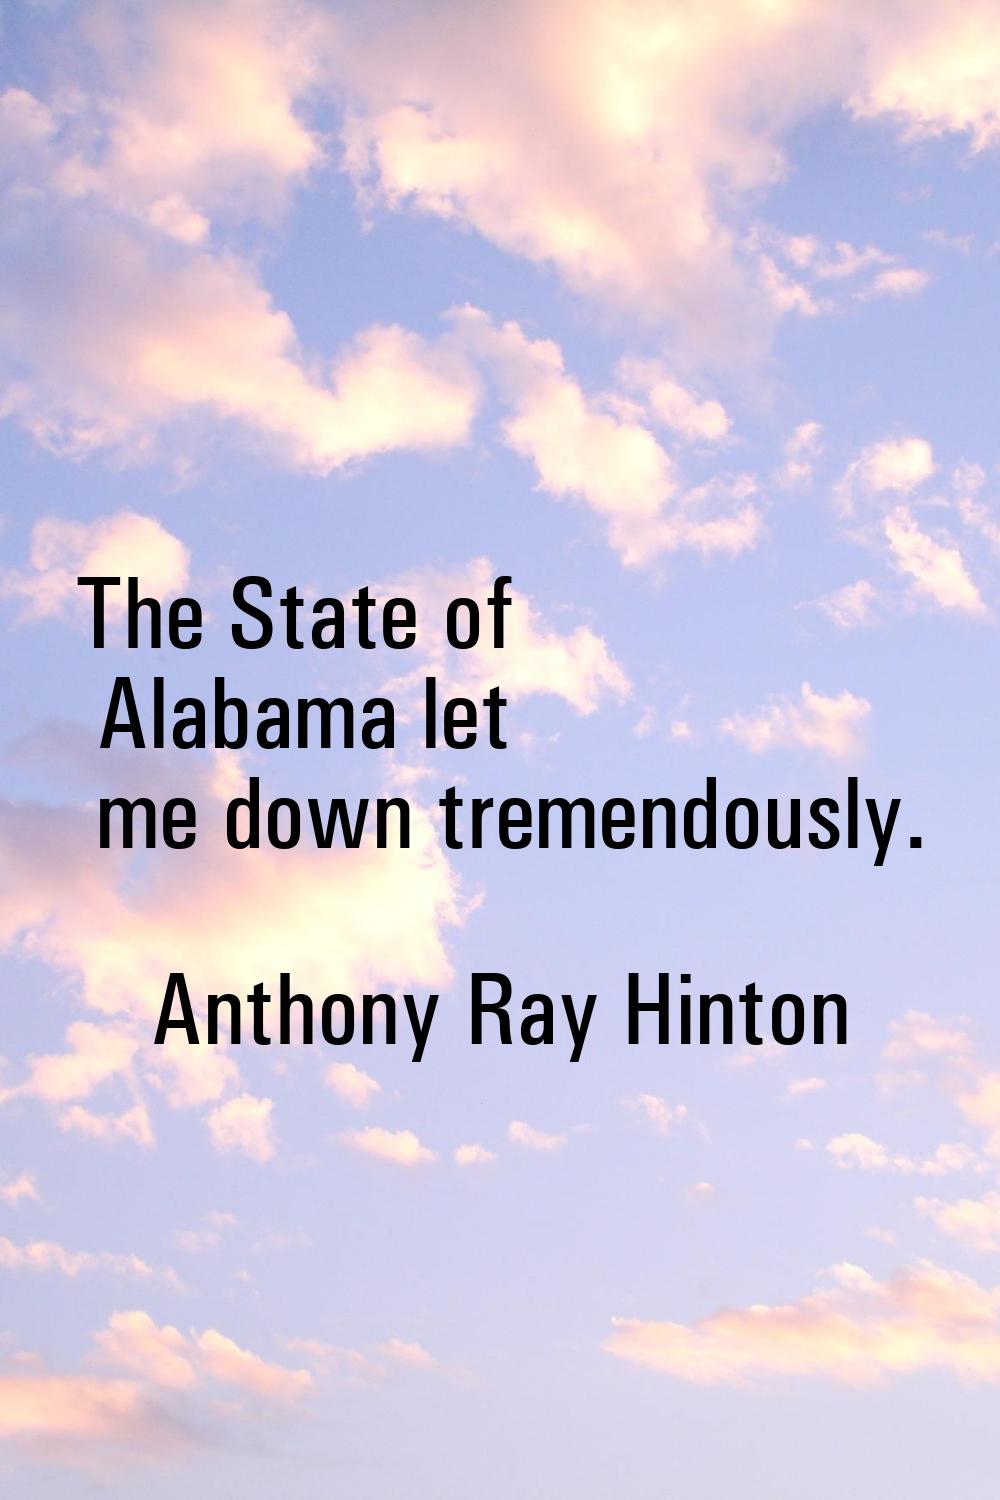 The State of Alabama let me down tremendously.